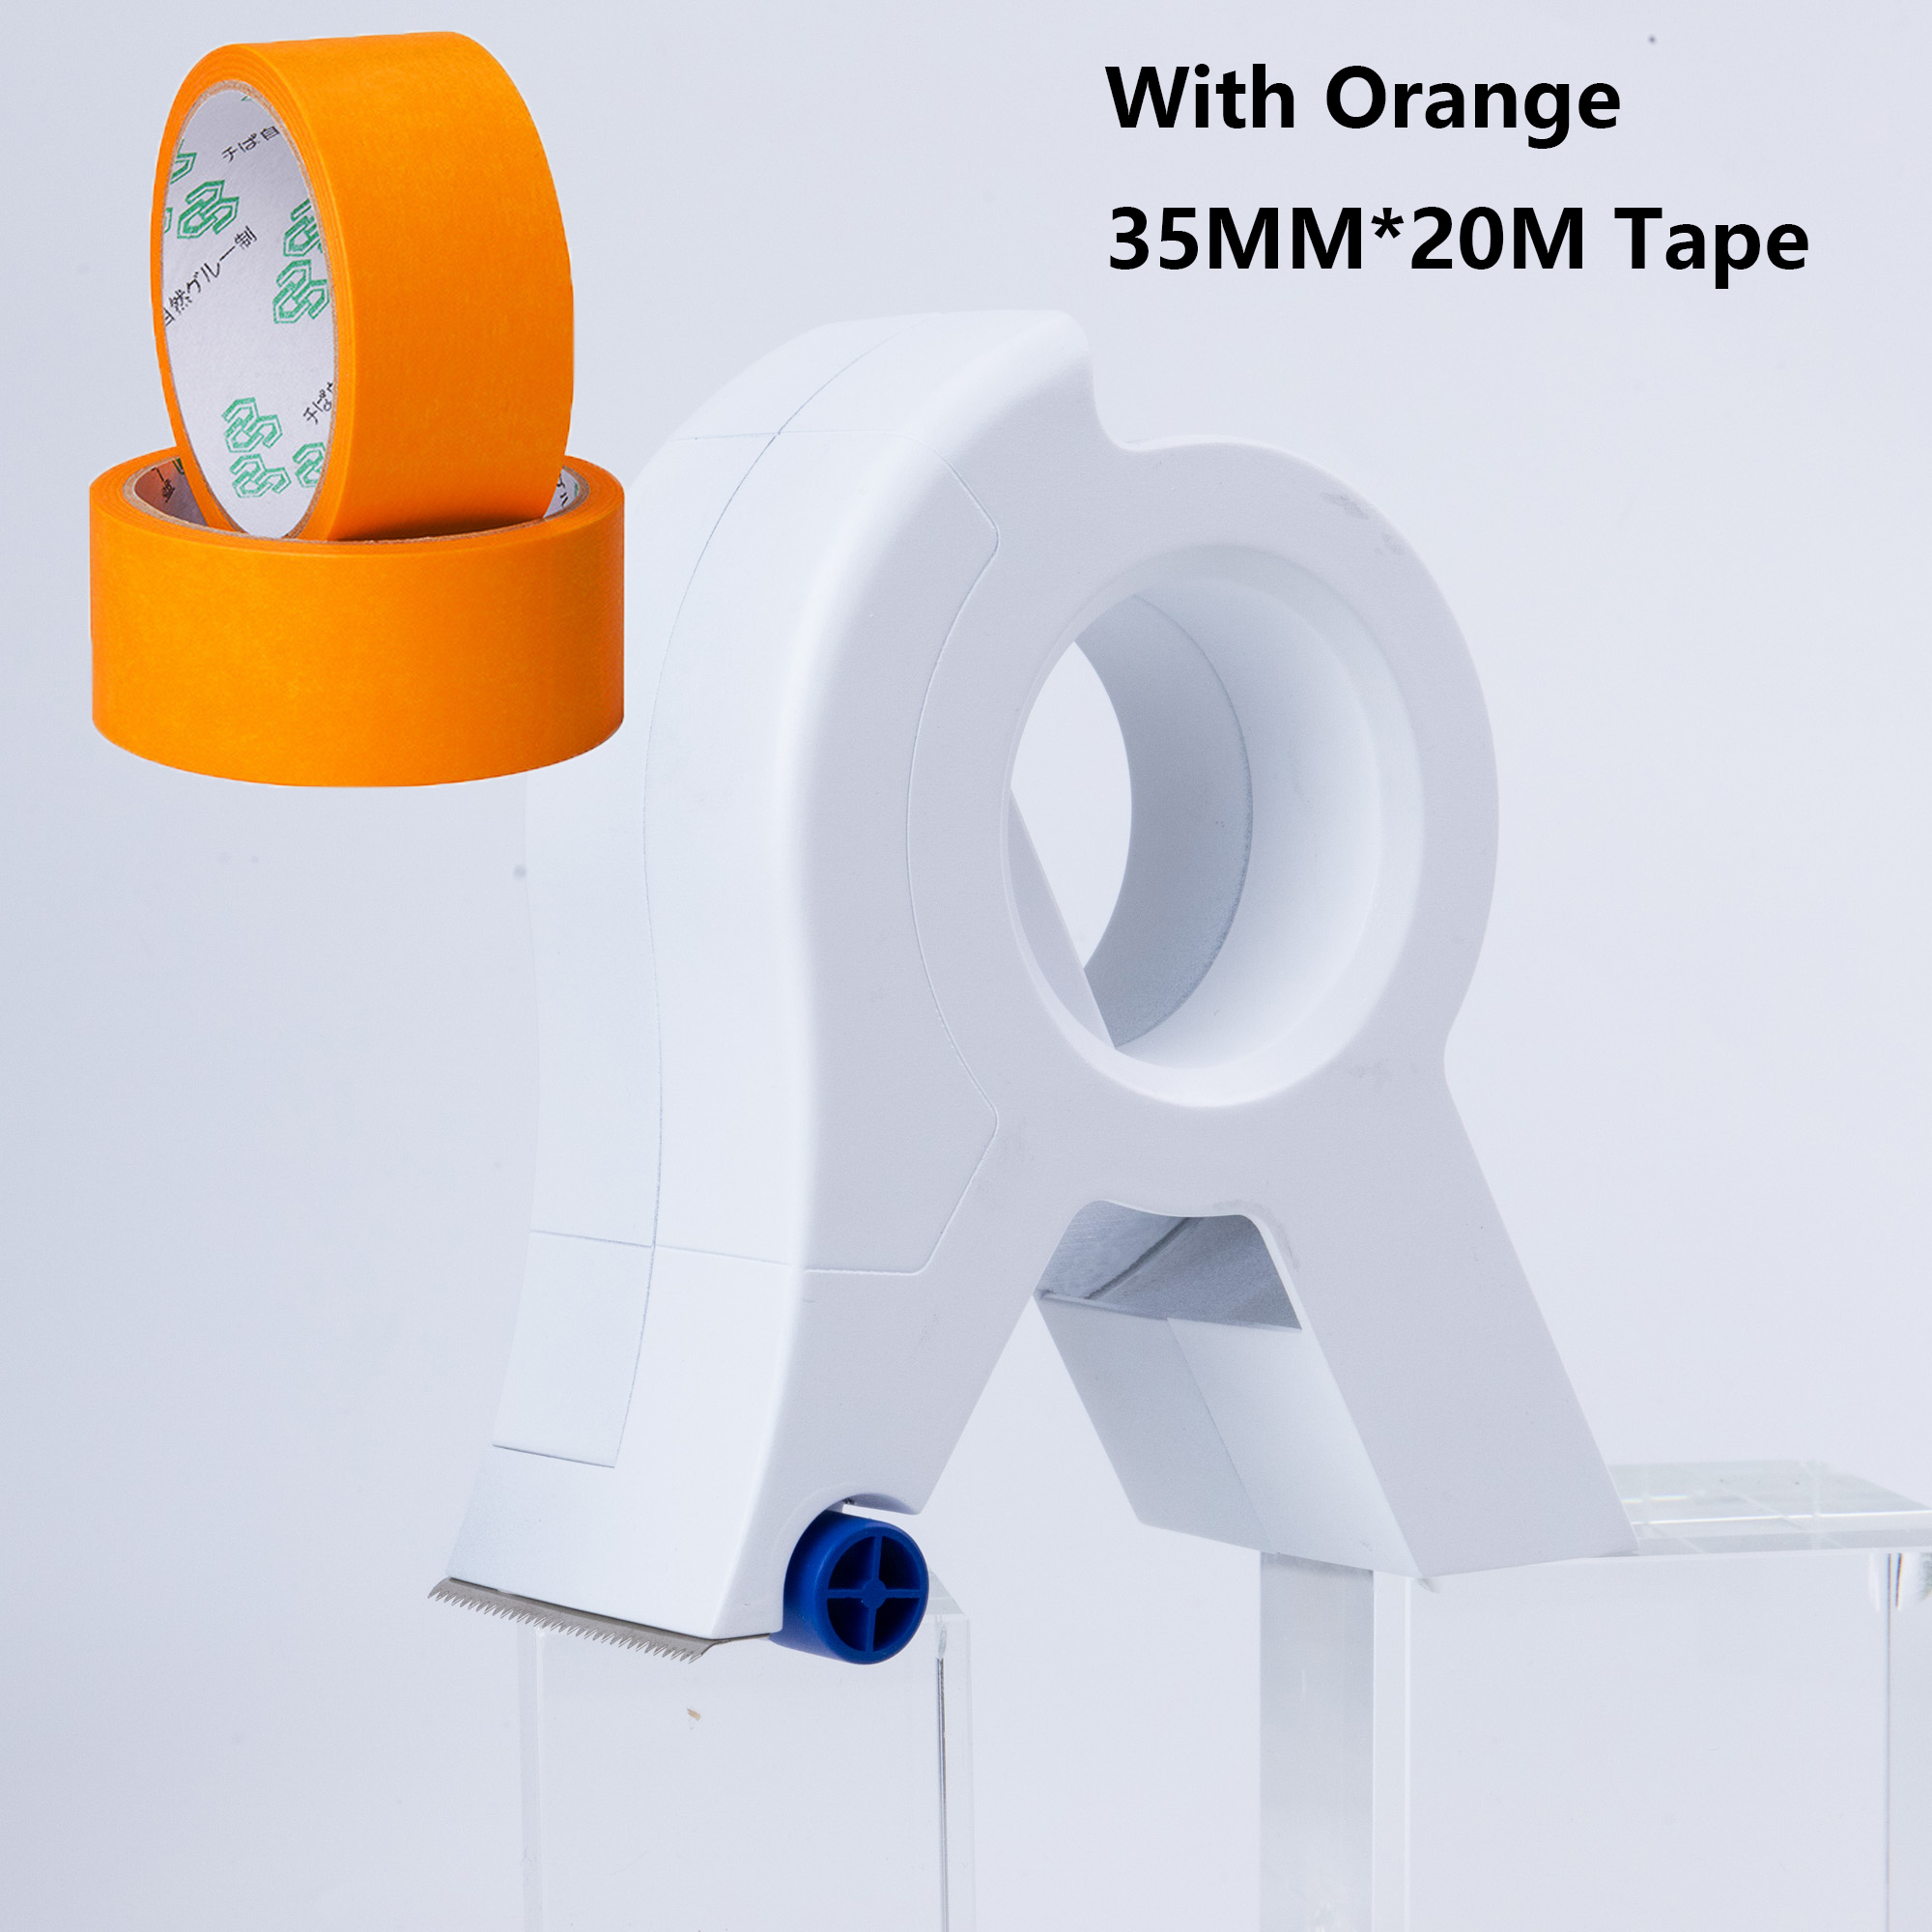 Painter Masking Tape Applicator Dispenser Machine Wall Floor Painting Packaging Sealing Pack Tape Tool Fit Tape 50mm Wide Max.: With A Orange Tape